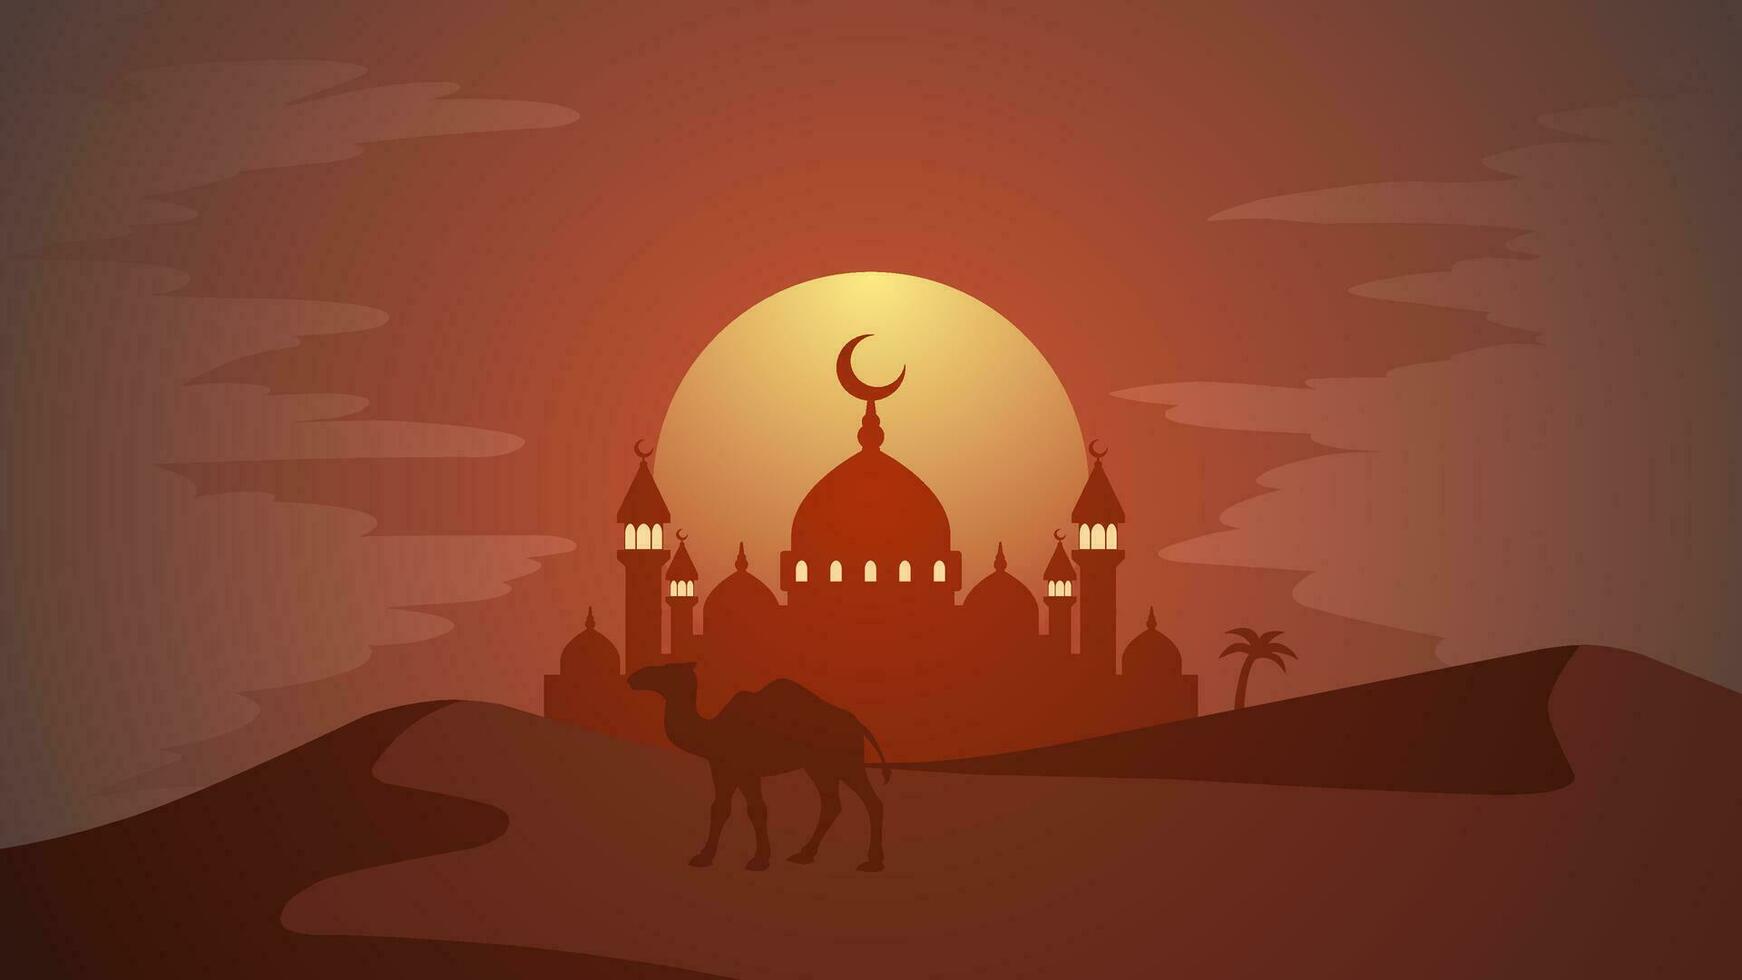 Mosque silhouette at desert in the night. Ramadan landscape design graphic in muslim culture and islam religion. Mosque landscape vector illustration, background or wallpaper